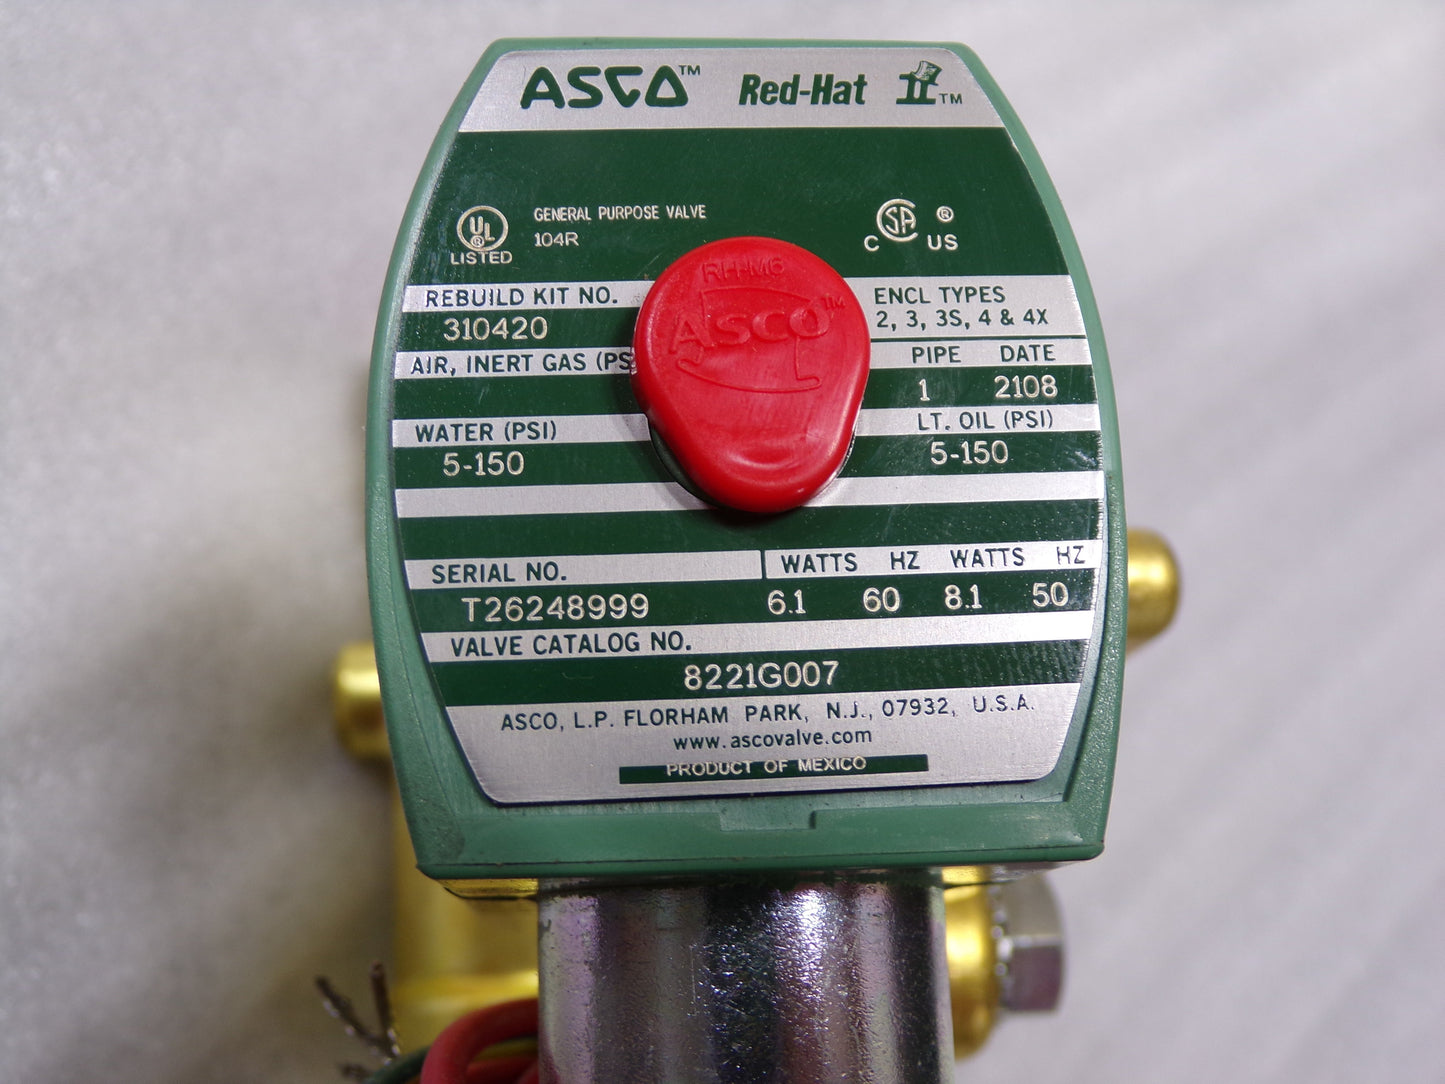 REDHAT 120V AC Brass Slow Closing Solenoid Valve, Normally Closed, 1" Pipe Size (CR00550-WTA14)